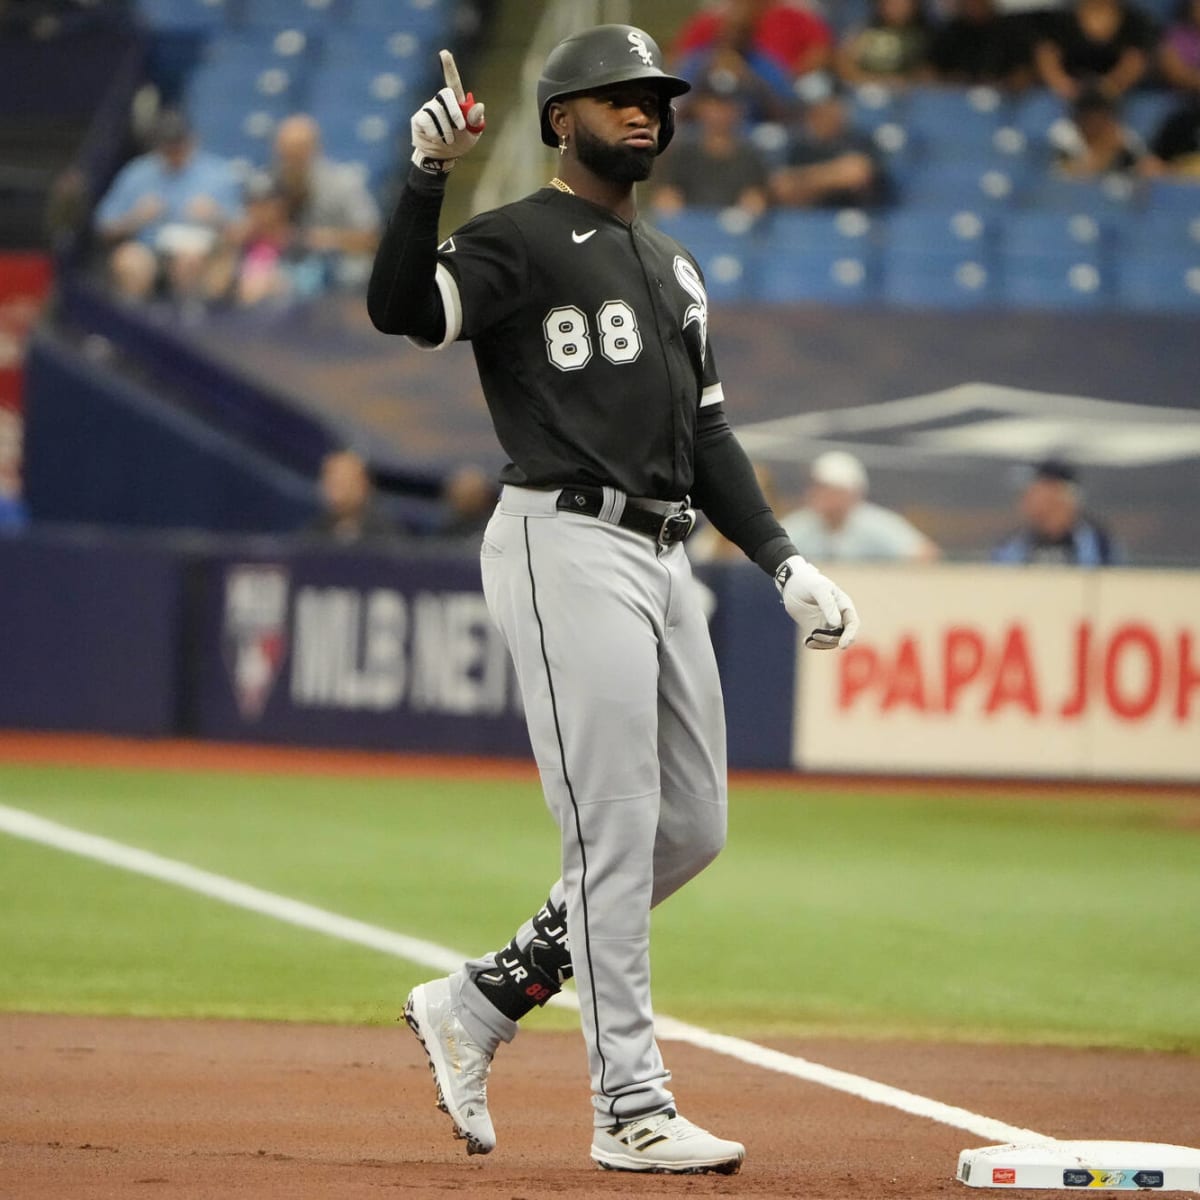 White Sox pull Robert after not hustling to 1st on grounder